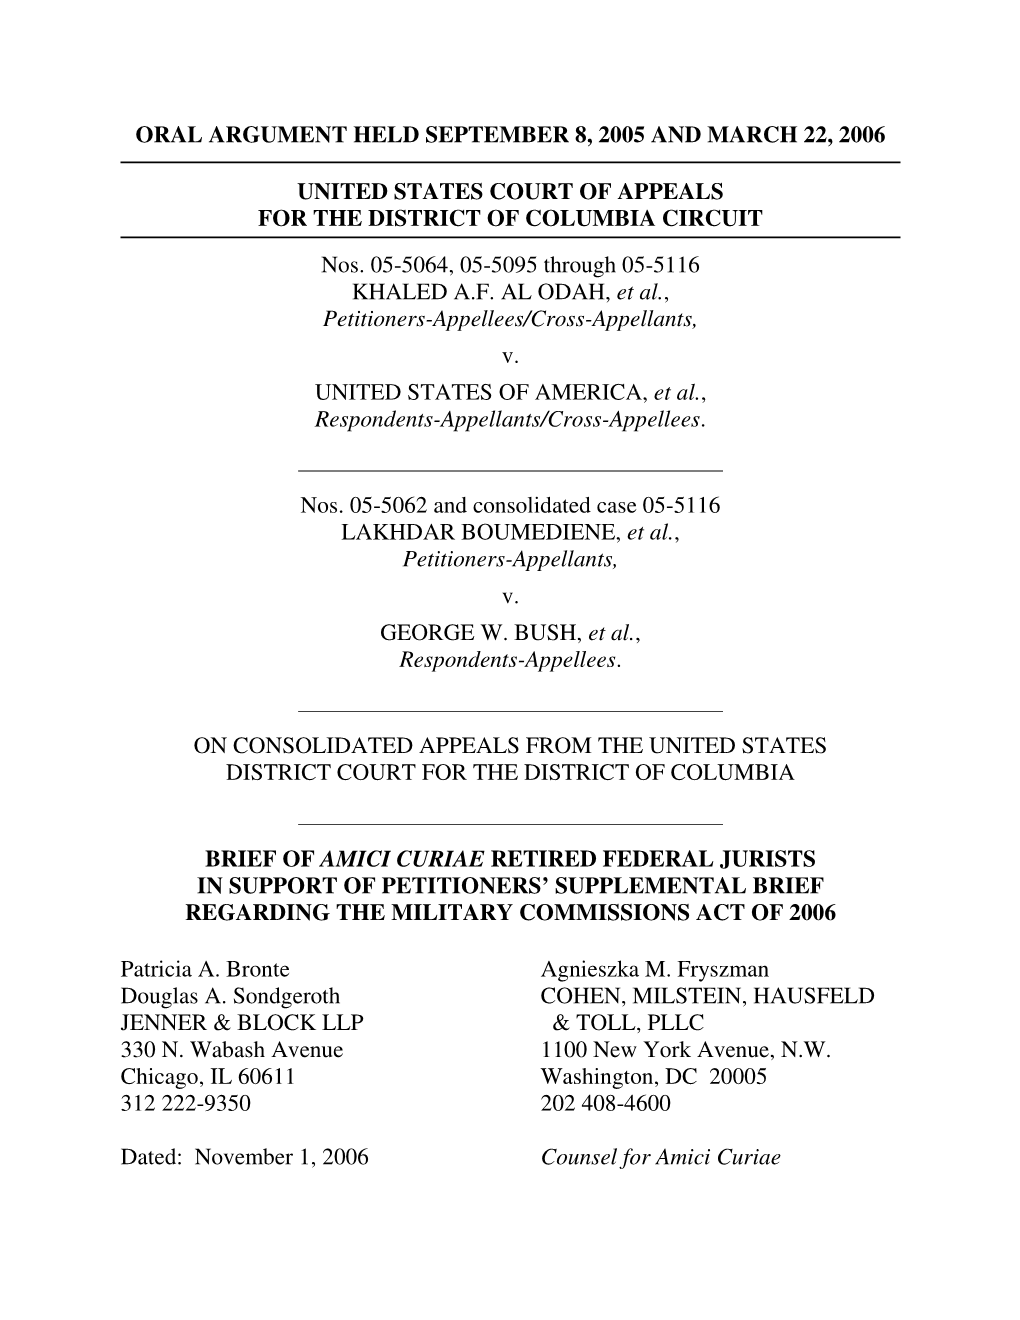 Brief of Amici Curiae Retired Federal Jurists Regarding the Military